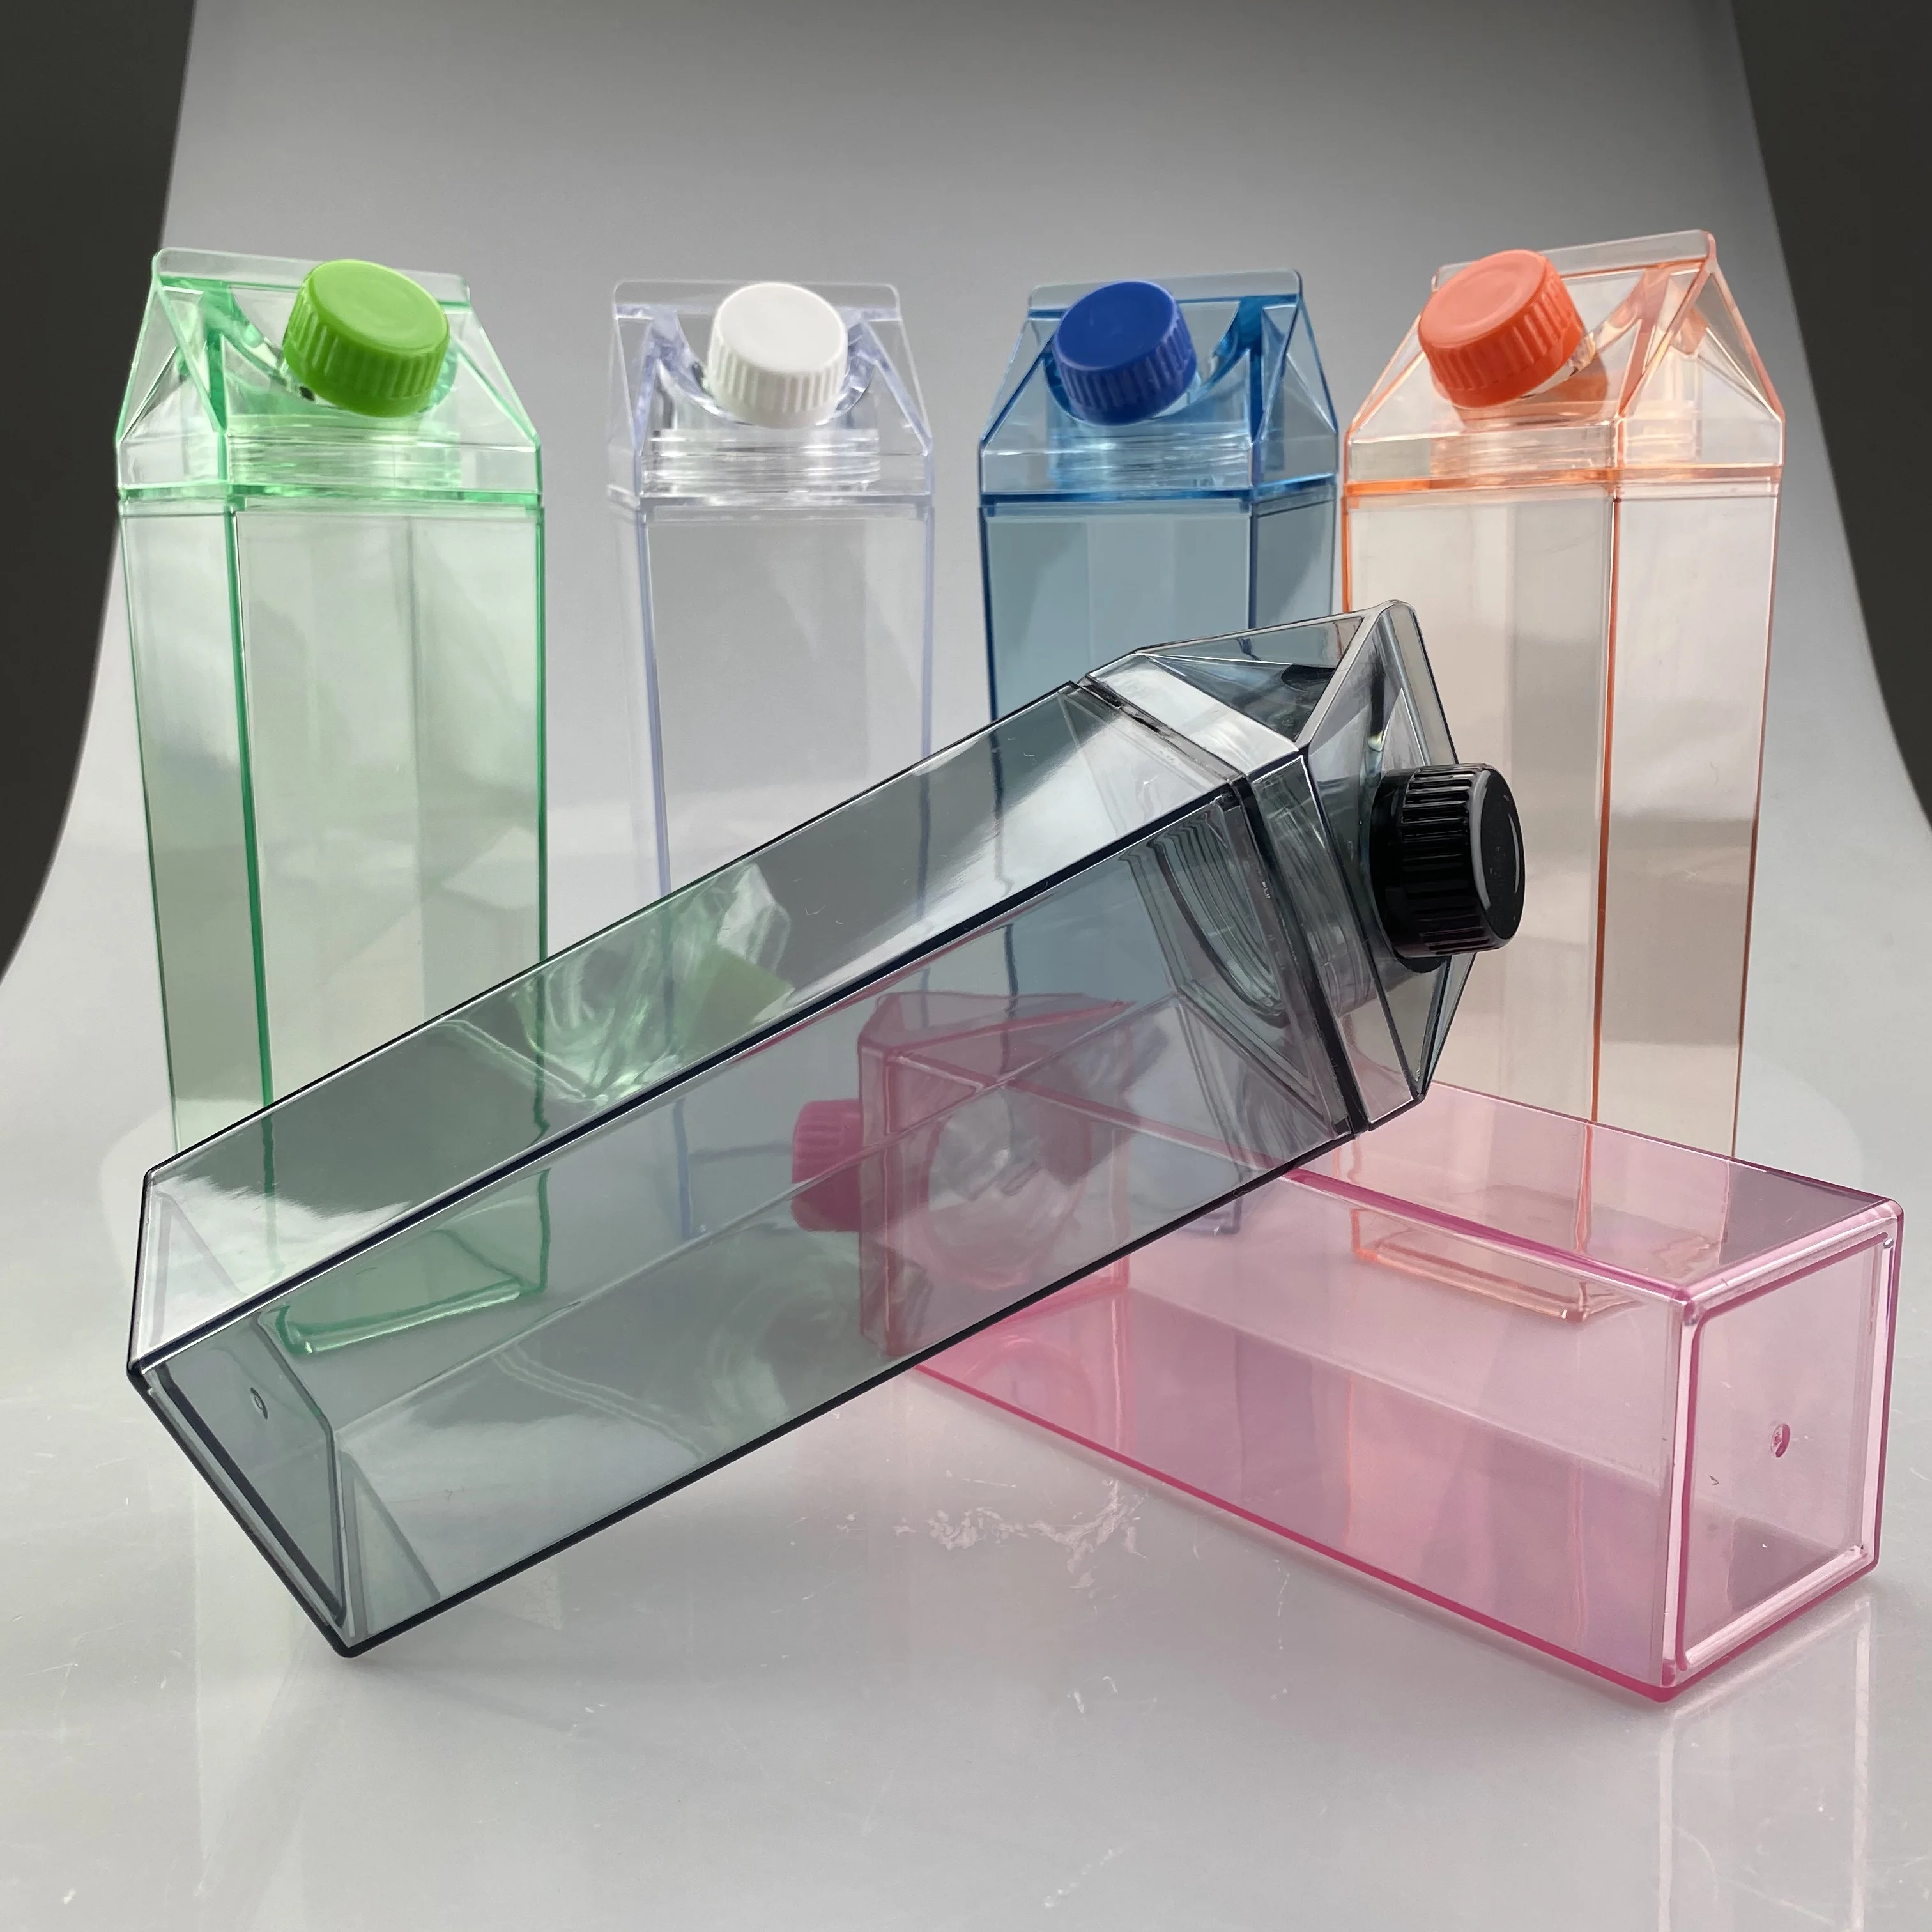 

500ml 1000ml BPA 17oz free Plastic Clear Pink Transparent Colored Acrylic Milk Box Carton Shaped Water Bottle, Clear, pink, black, etc